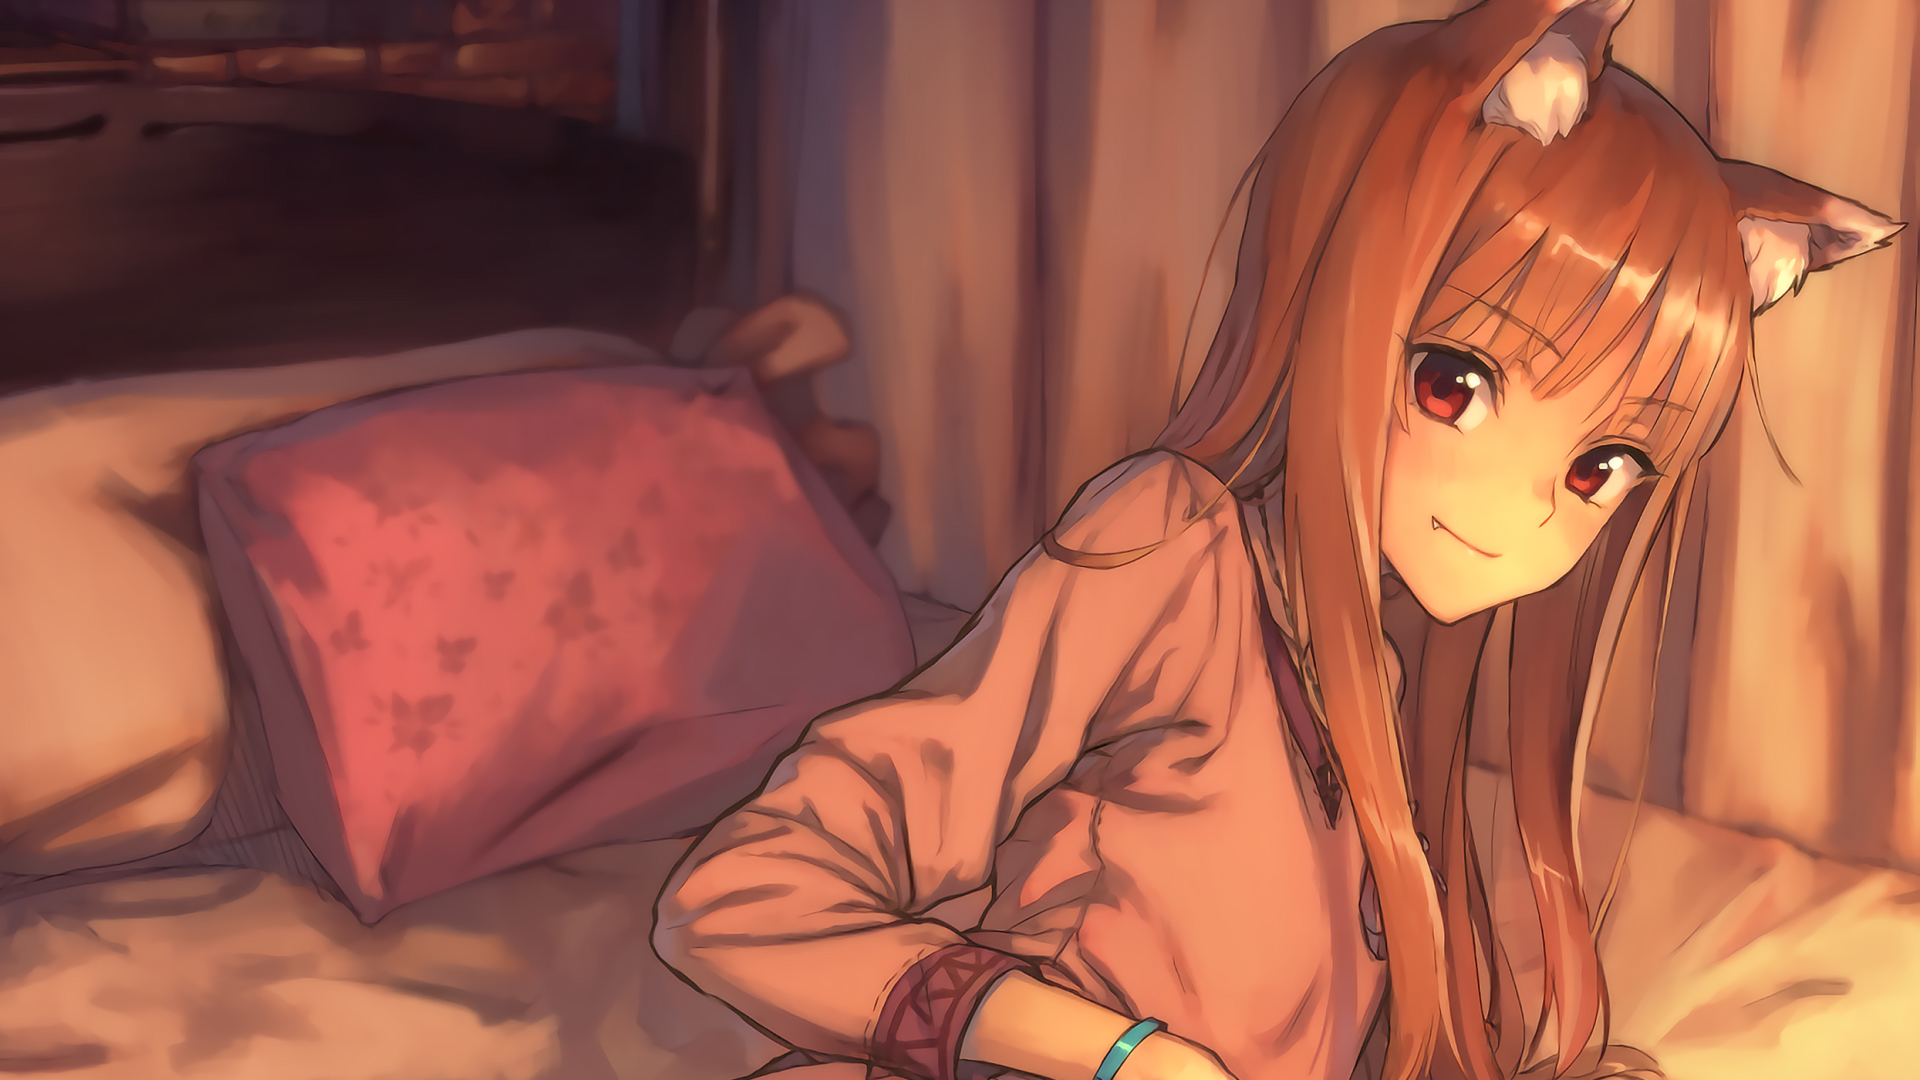 Anime 1920x1080 anime anime girls Spice and Wolf Holo (Spice and Wolf) pillow bed